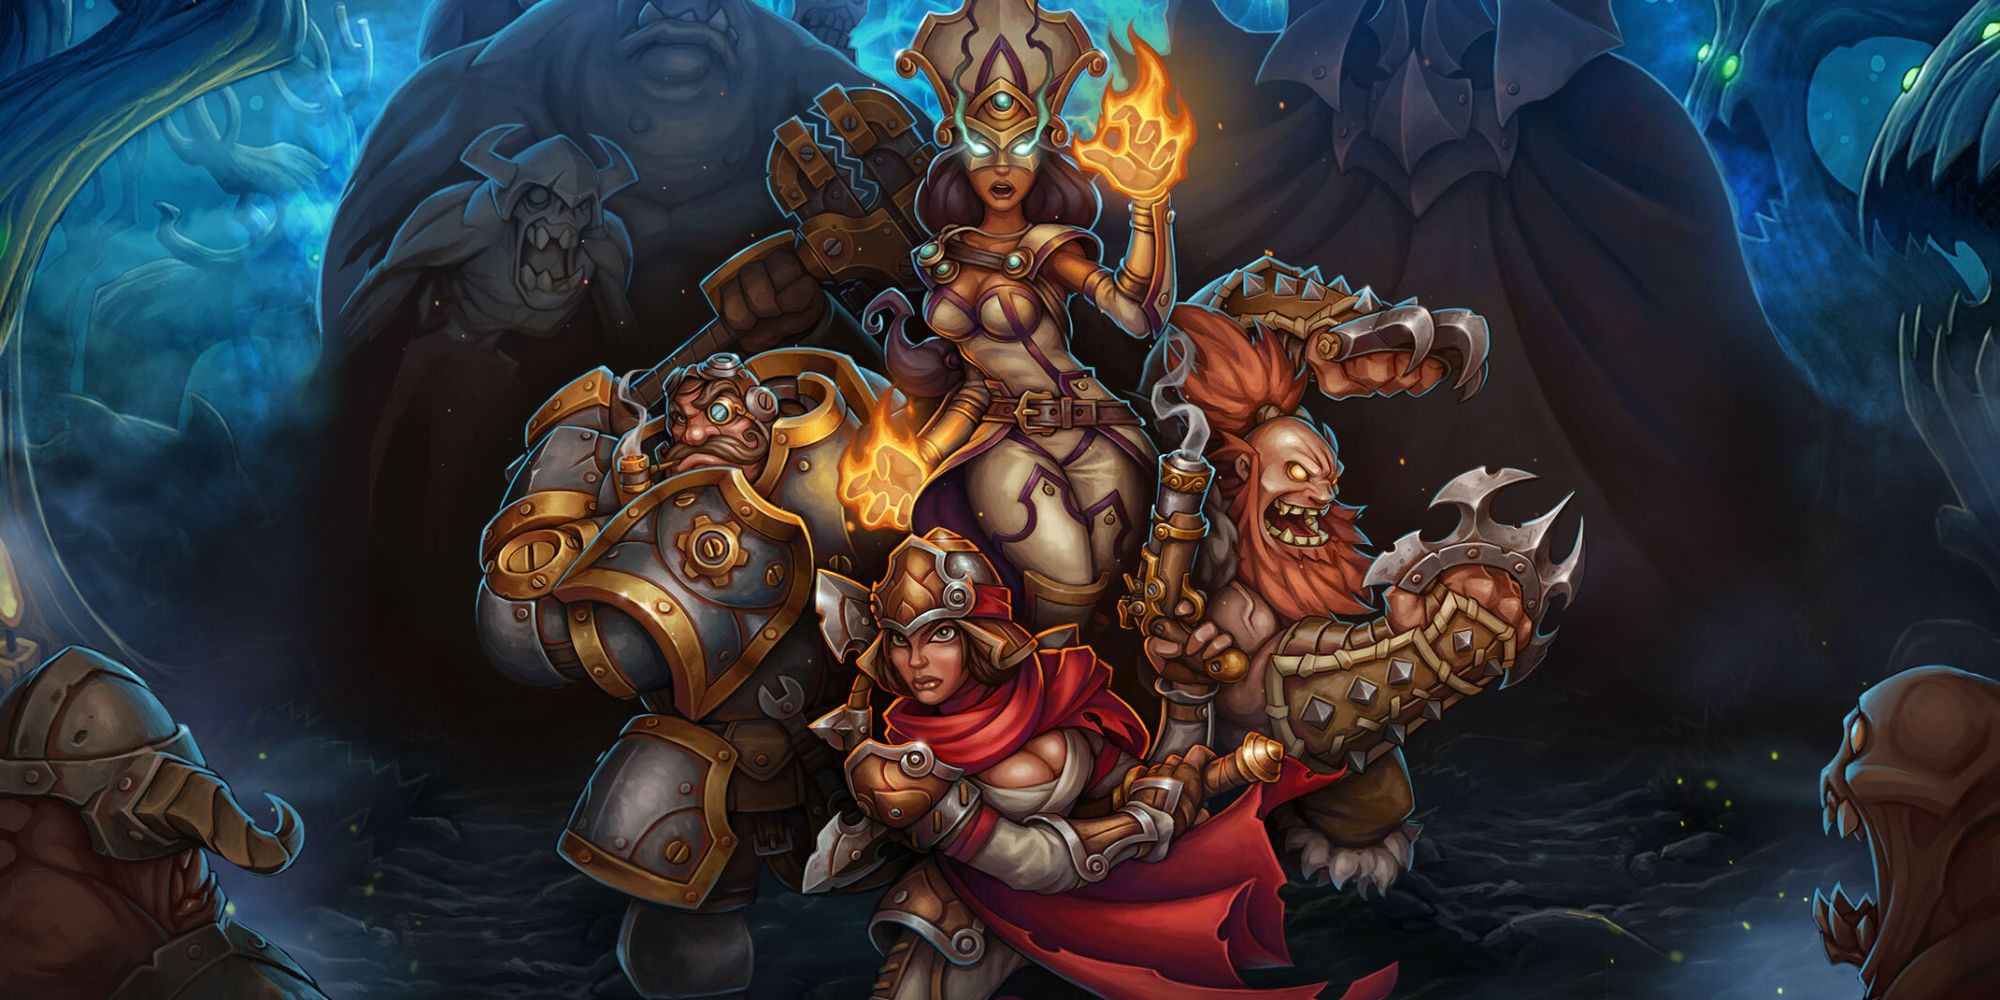 Key Art for Torchlight 2, showing a party of characters fighting off surrounding undead enemies.